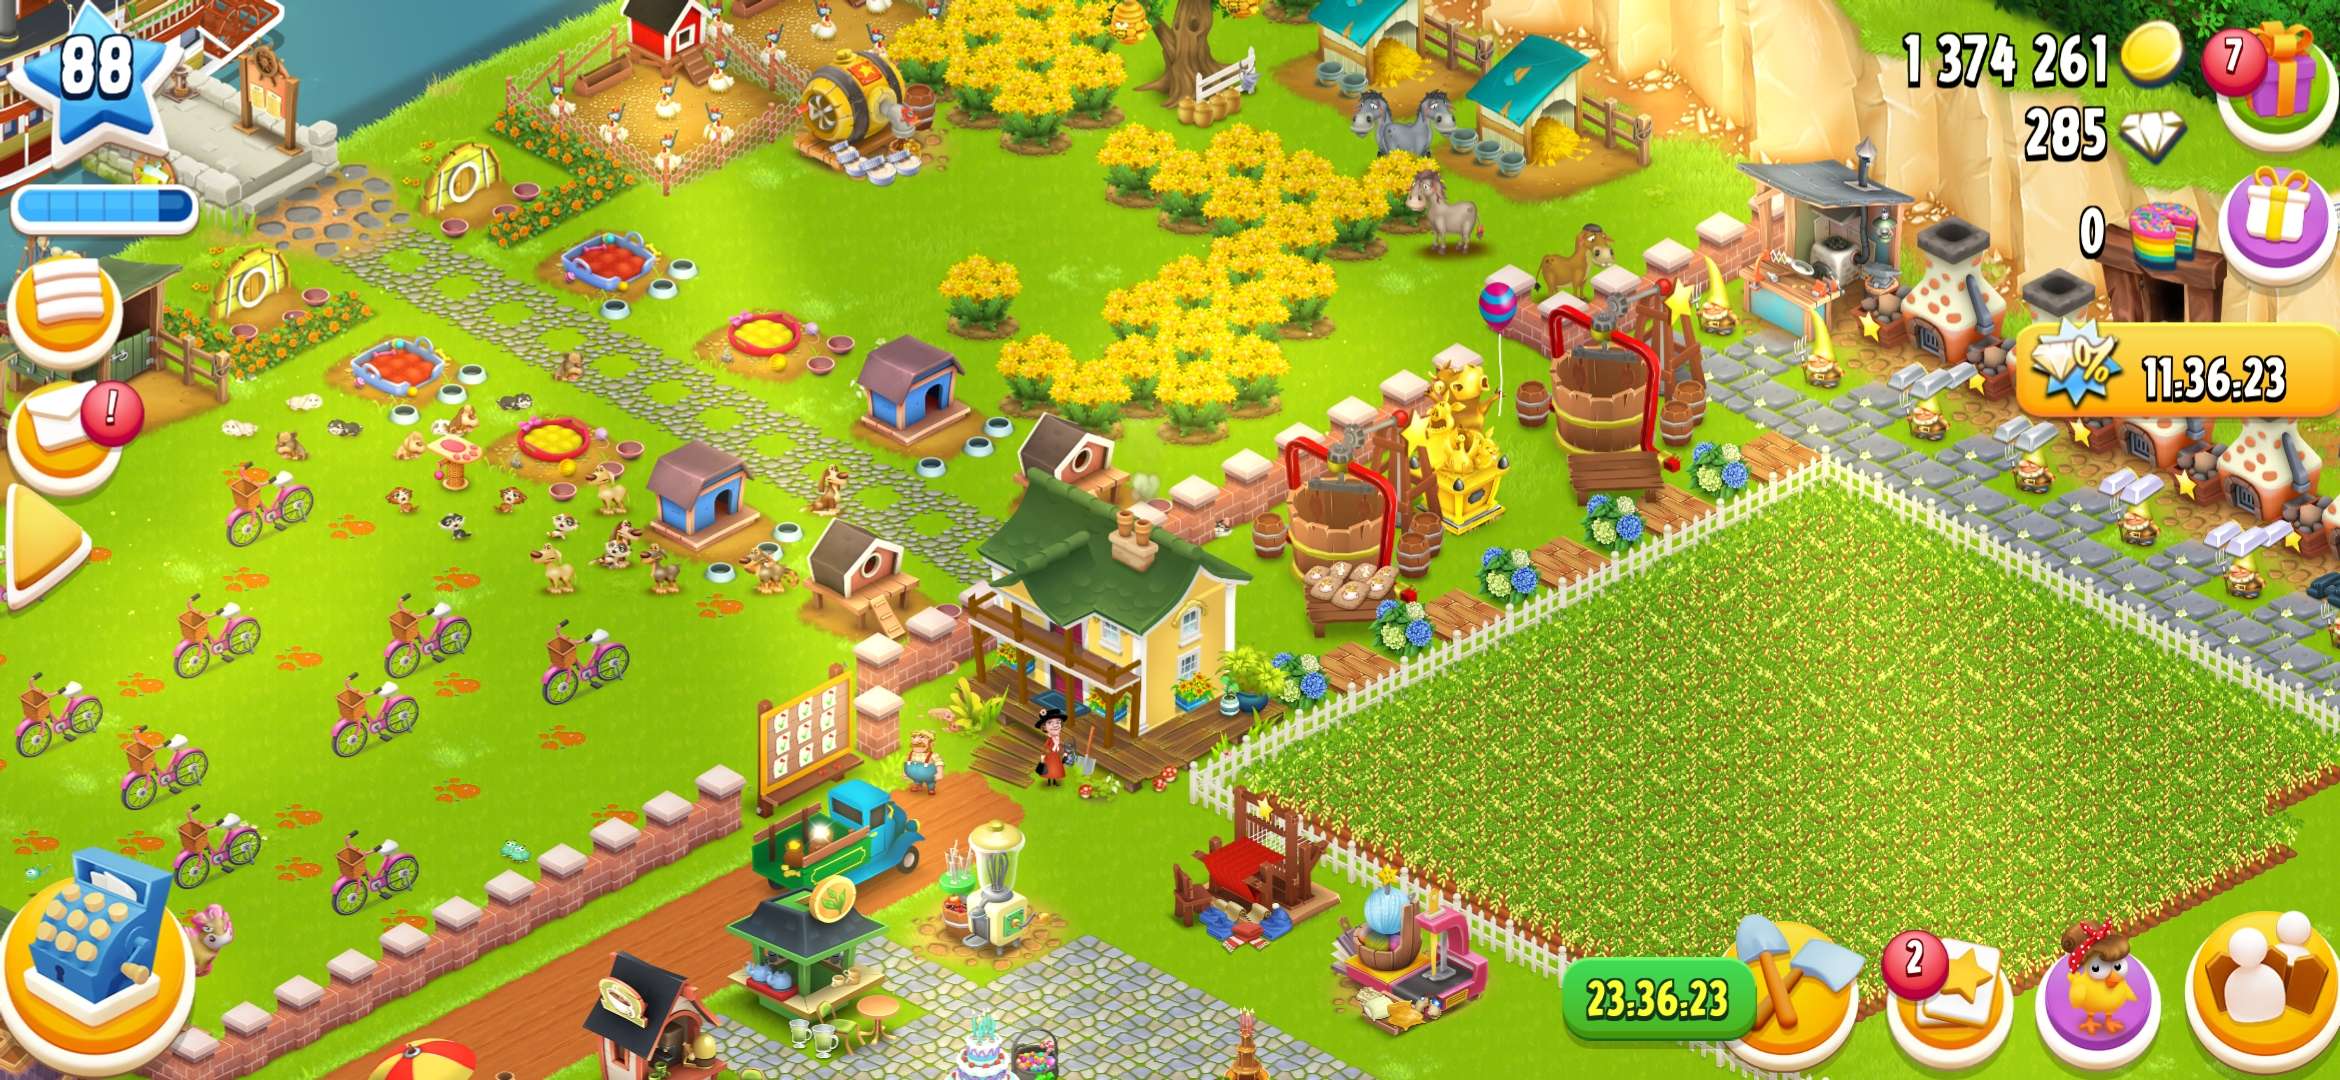 Hay Day Account Full Access Cheap